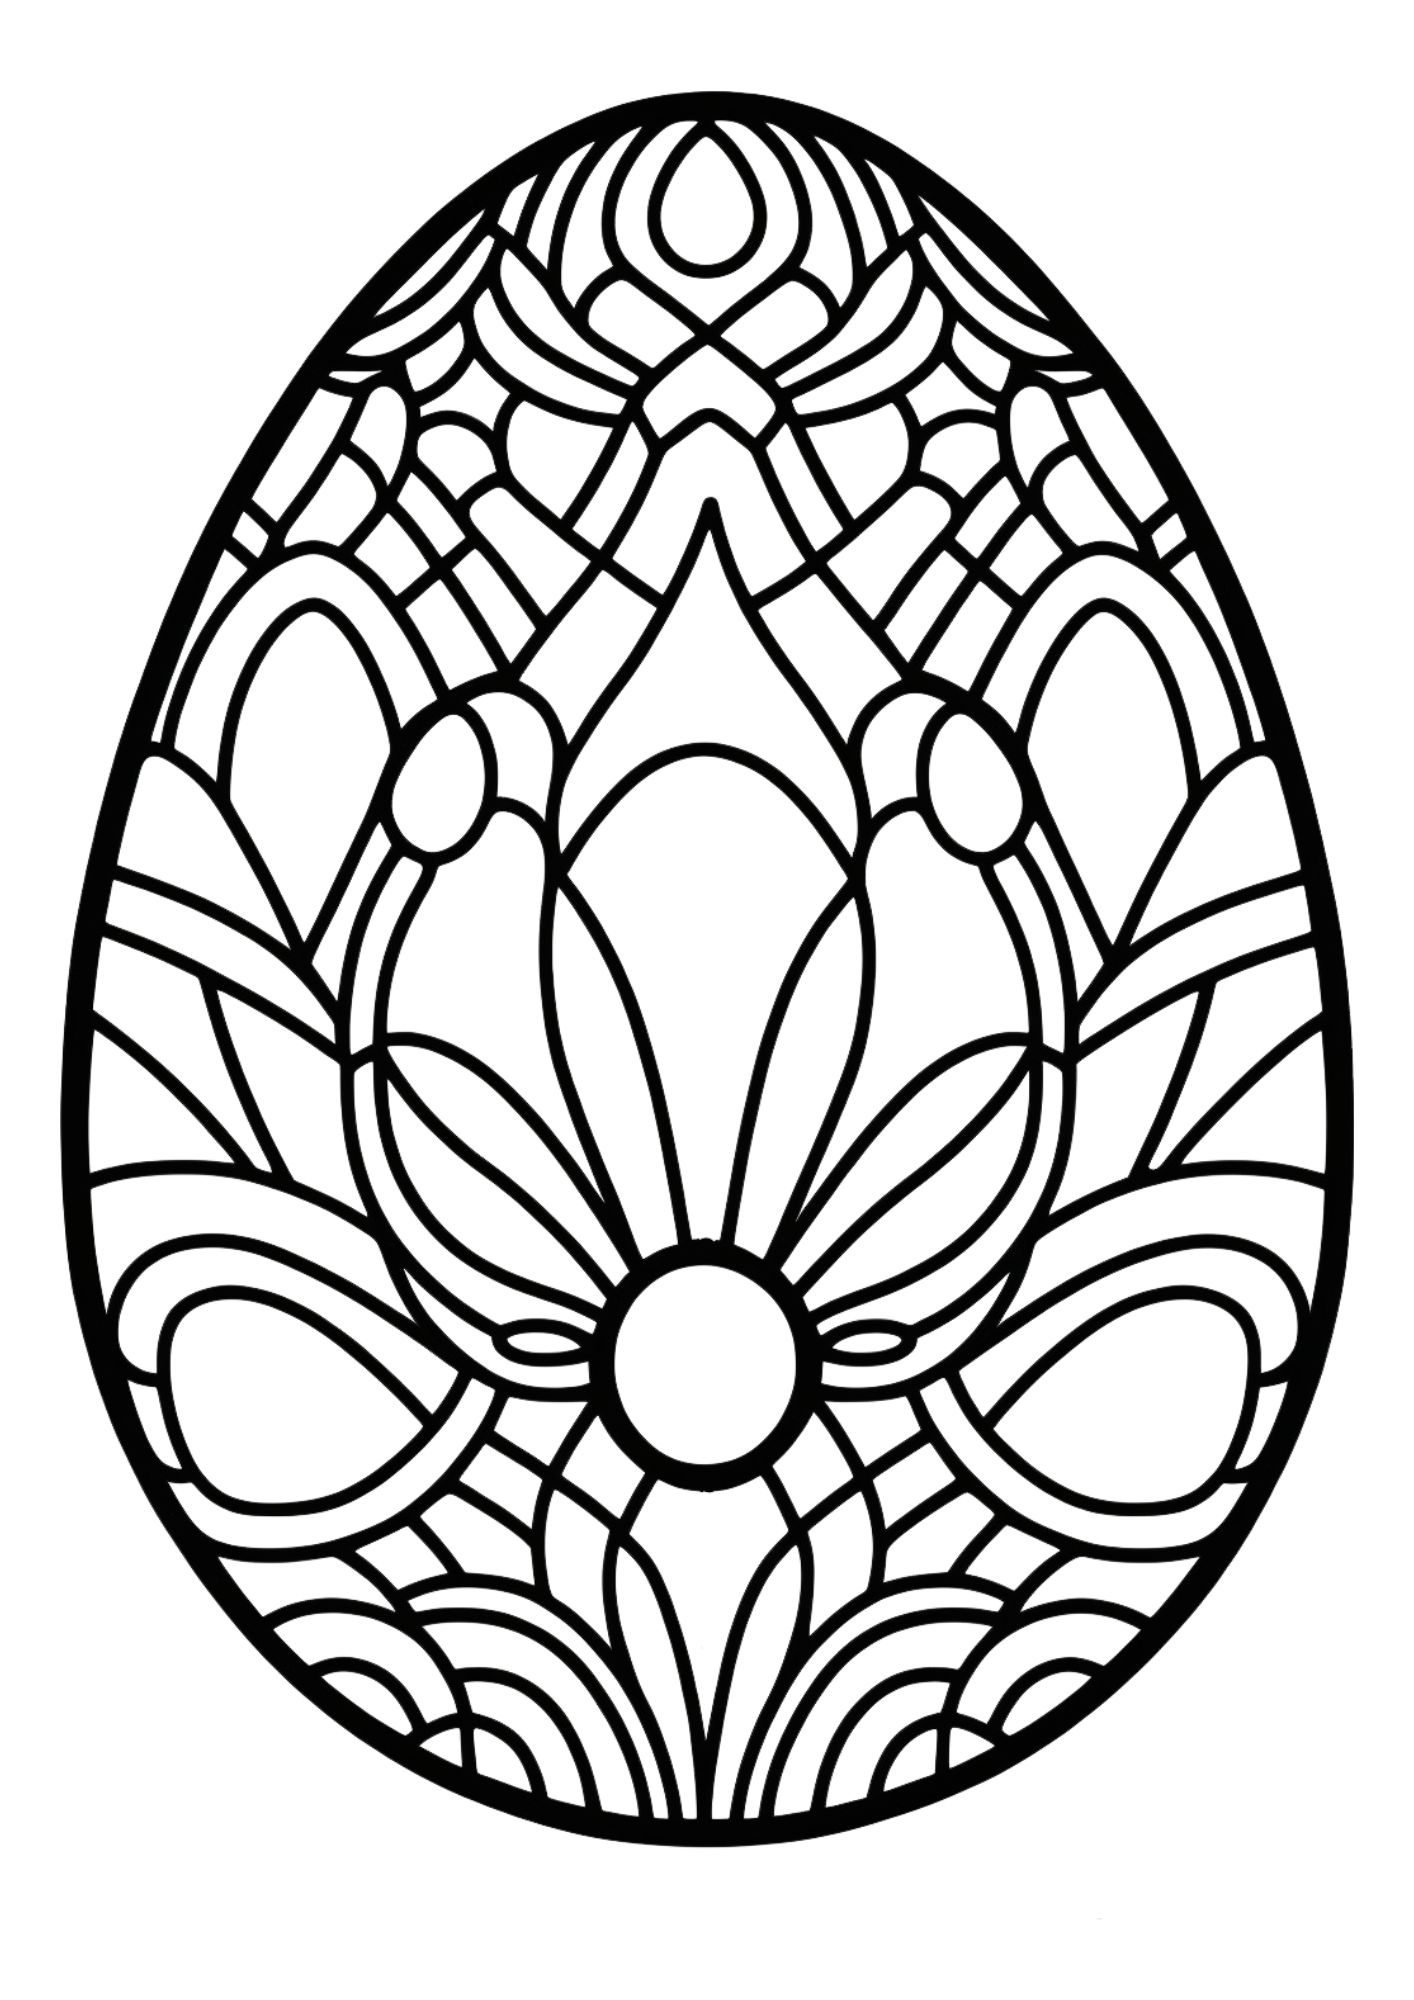 Free printable easter egg coloring pages for kids and adults to enjoy